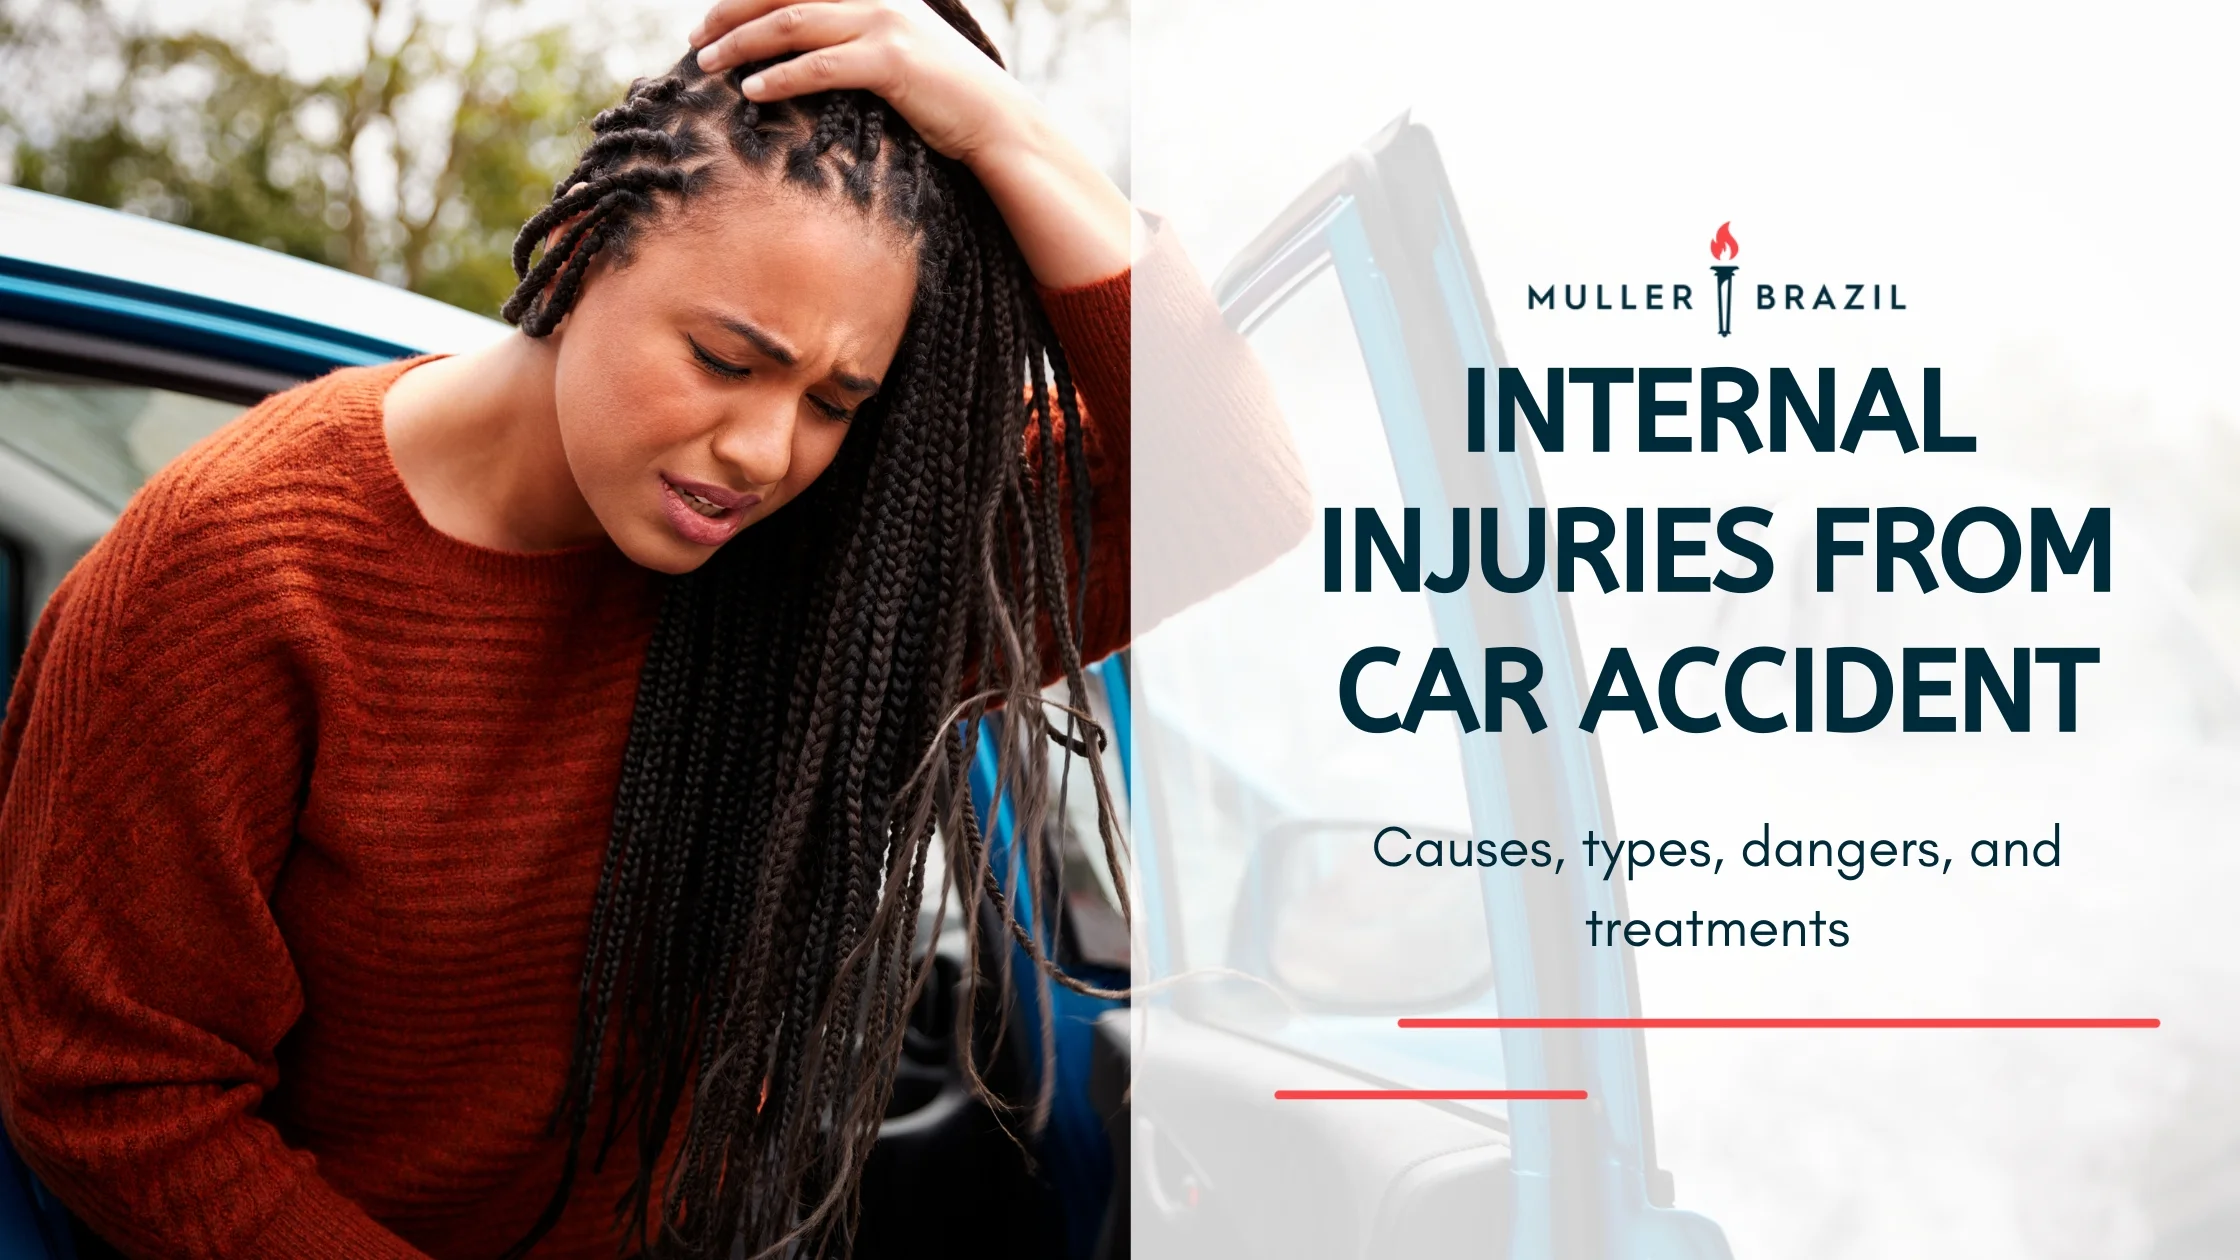 Blog featured image of a woman holding her head and a caption that says “Internal Injuries from car accident